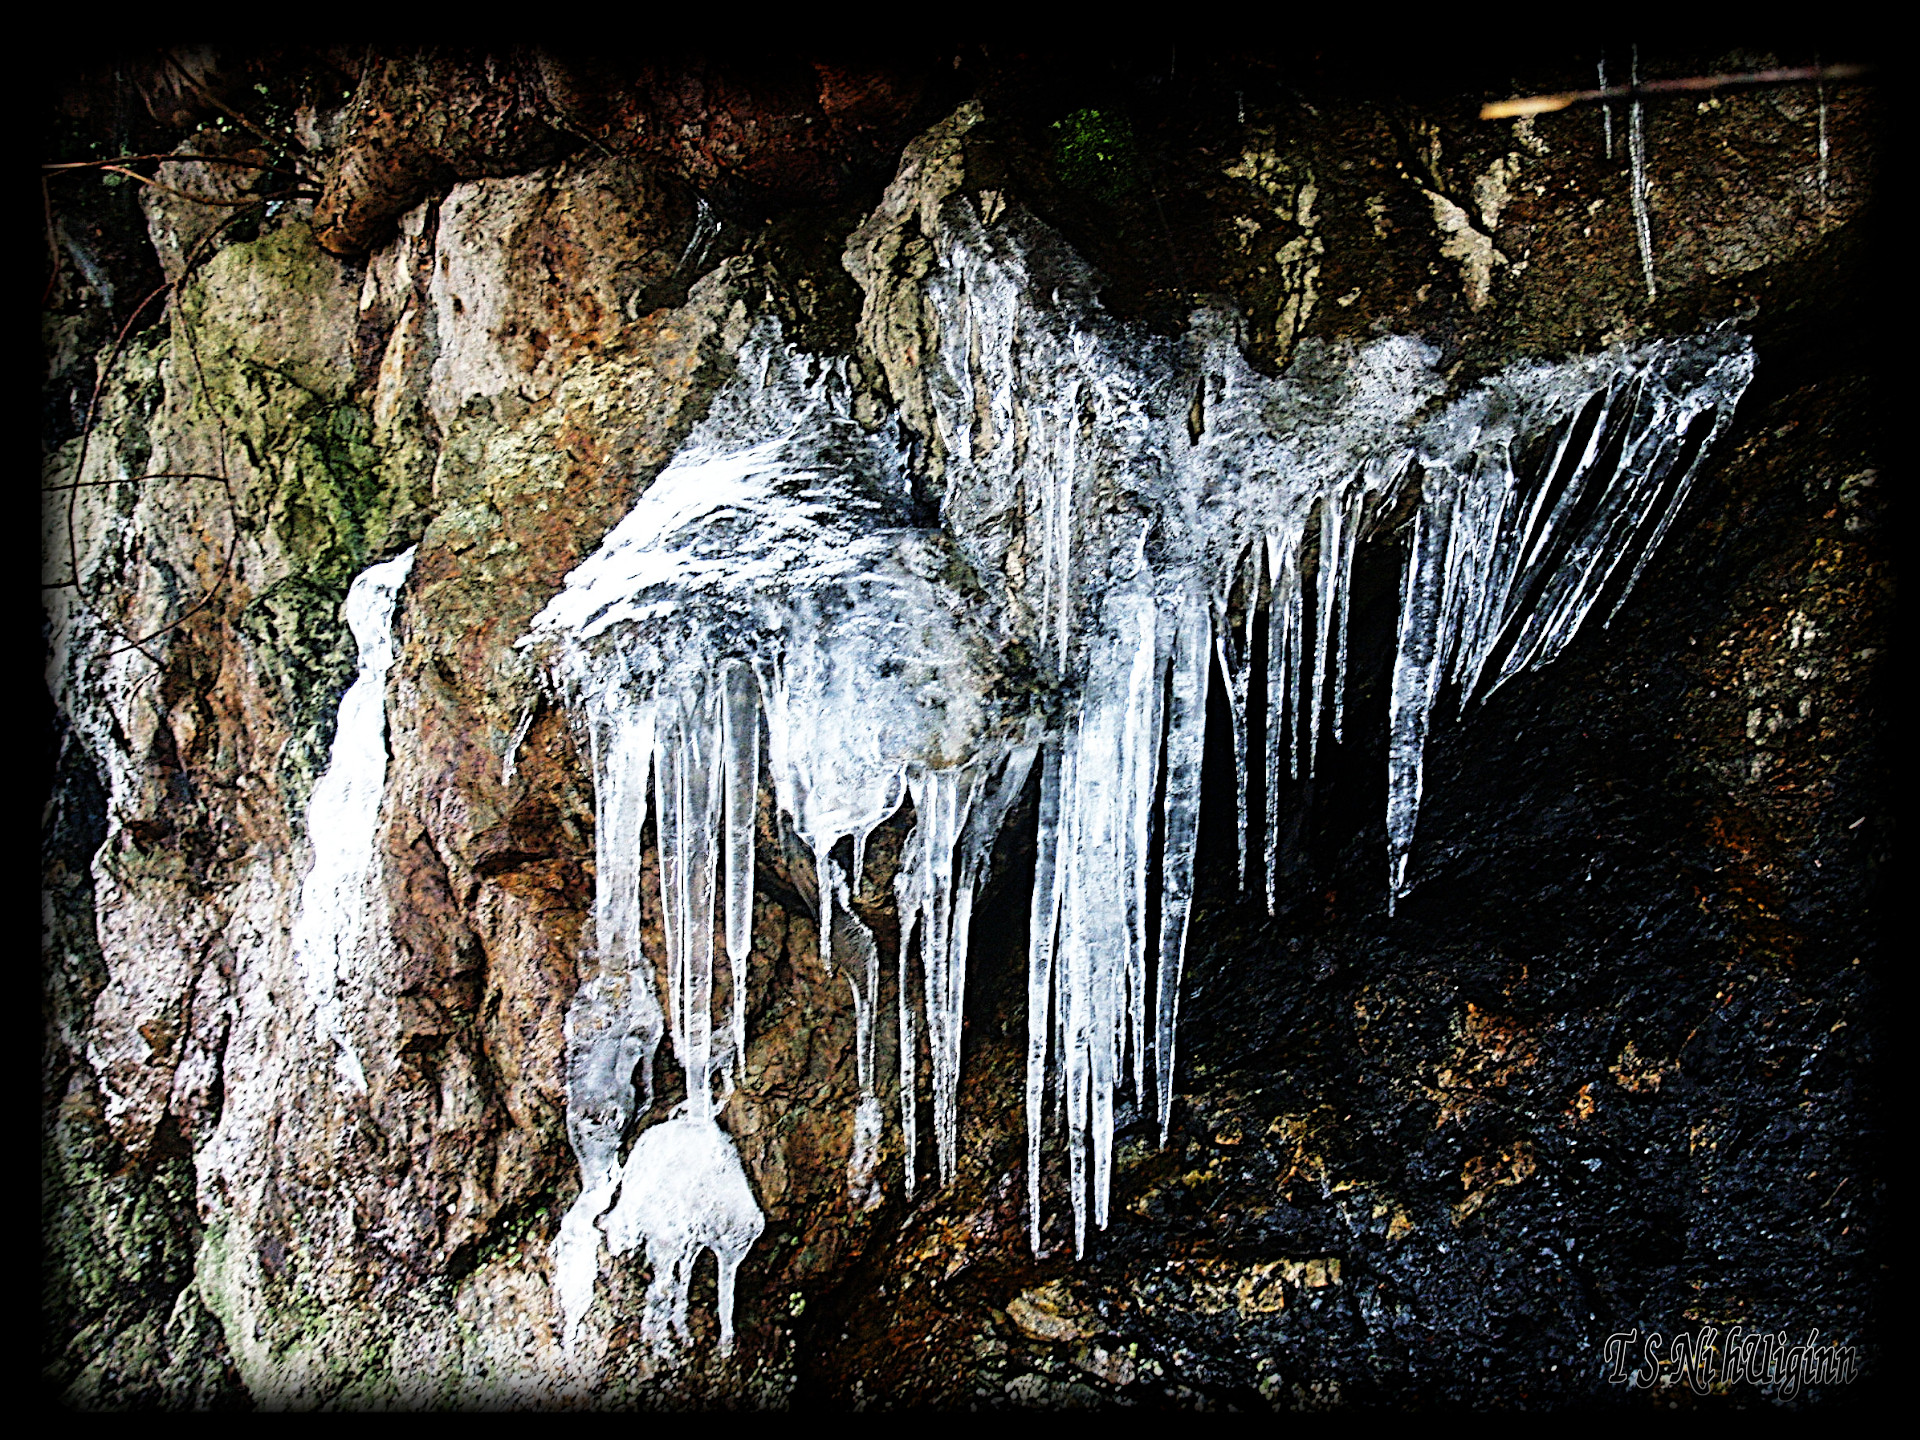 Icicles hanging off of an old fence by Coastal Salish Photographer TS Ni hUiginn